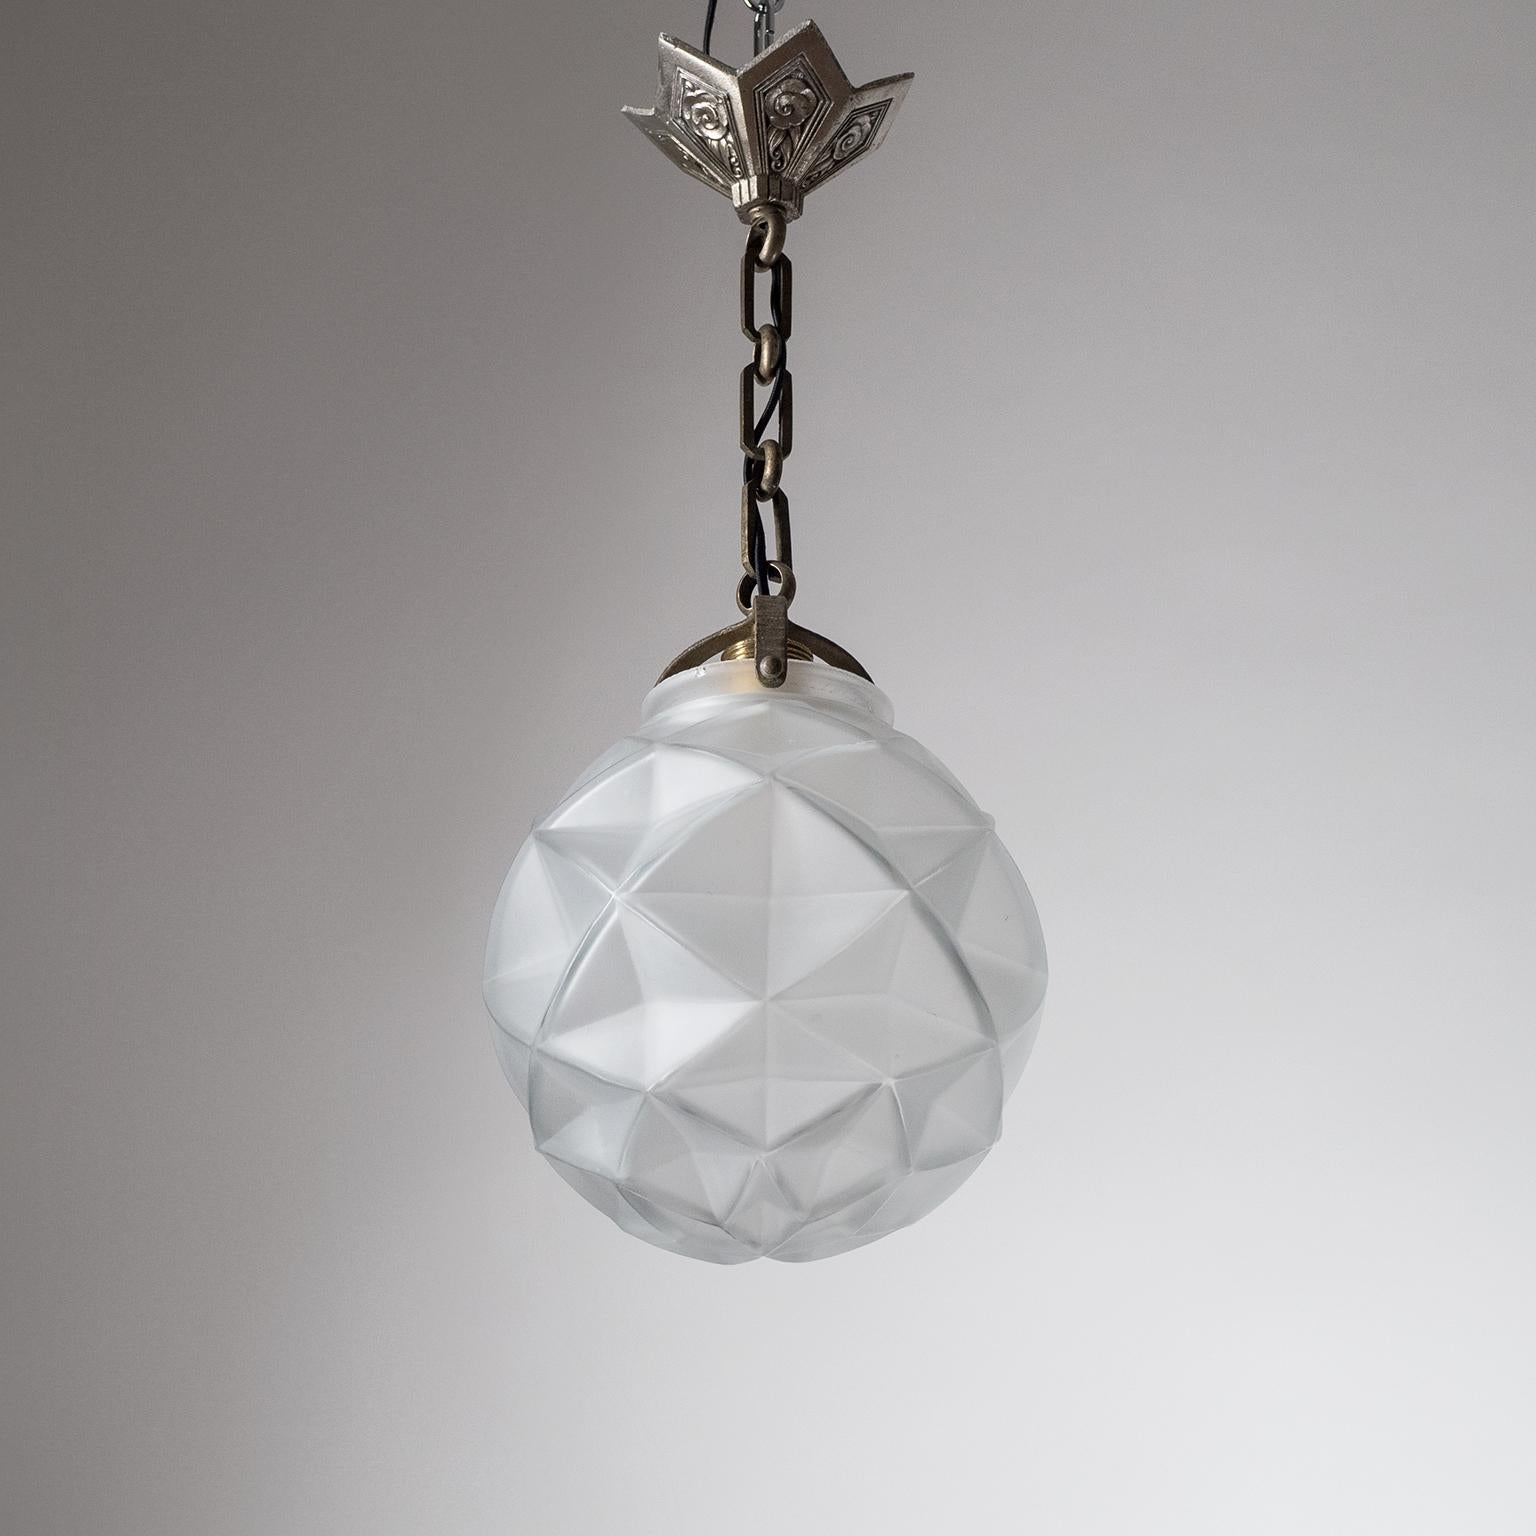 French Art Deco Pendant, 1930s, Satin Glass and Nickel 6